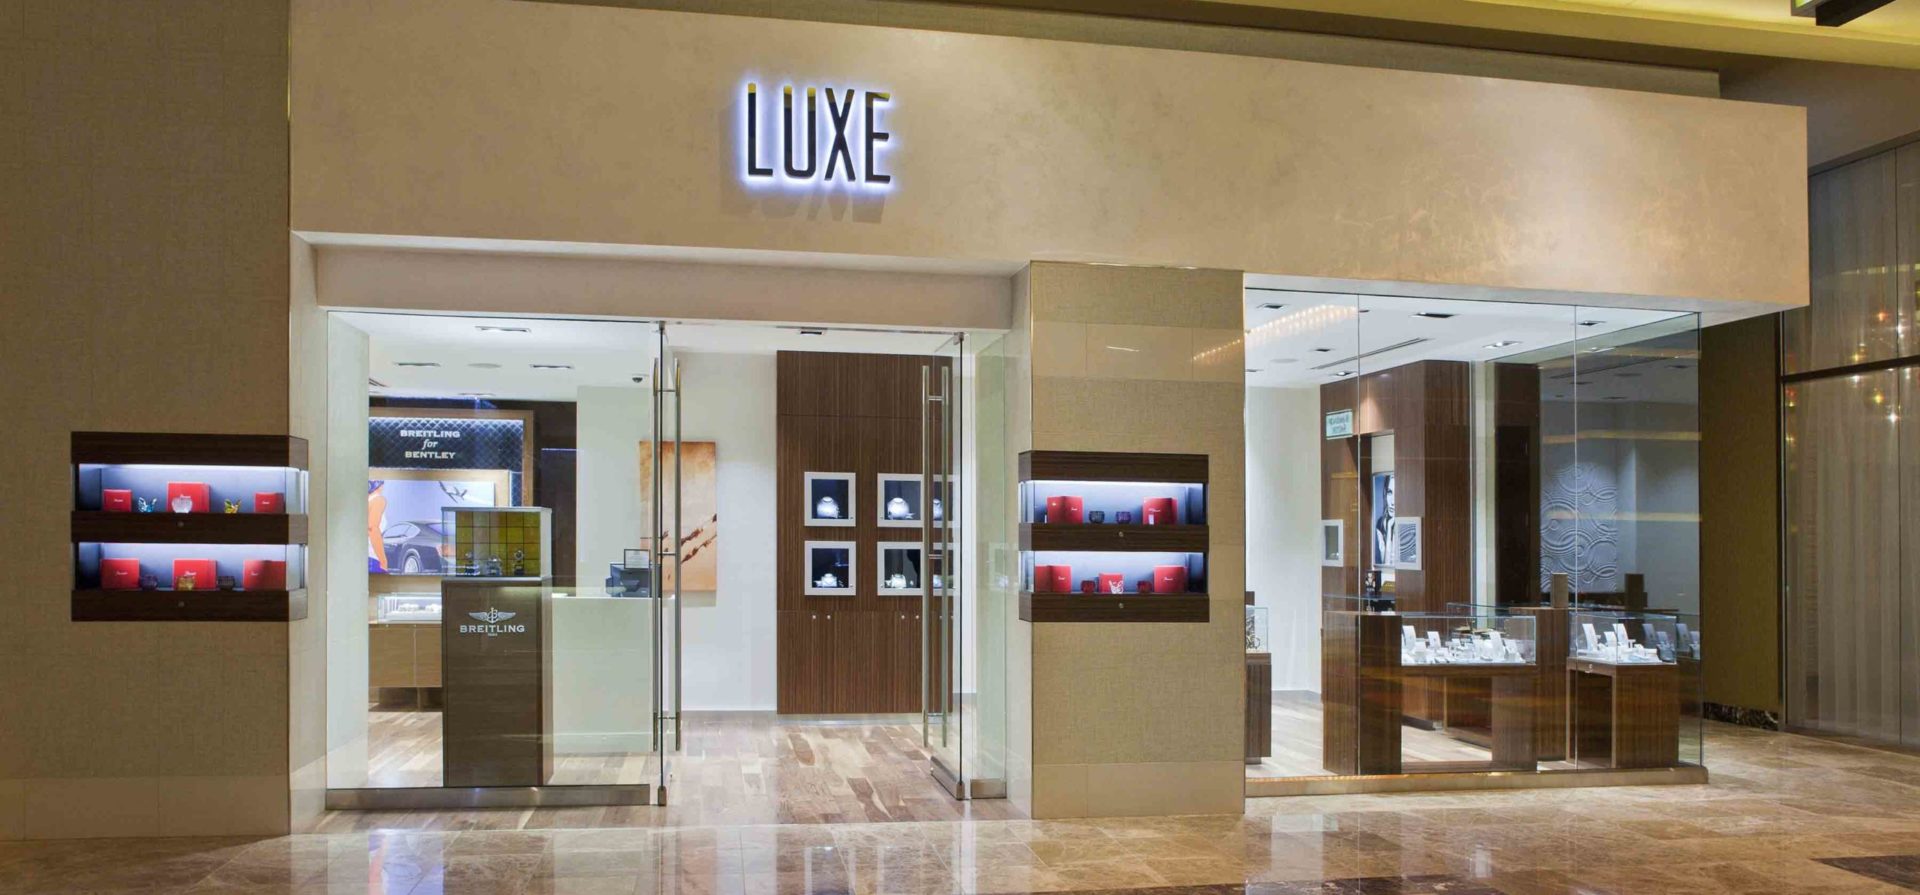 Golden Nugget Retail Stores: Luxe